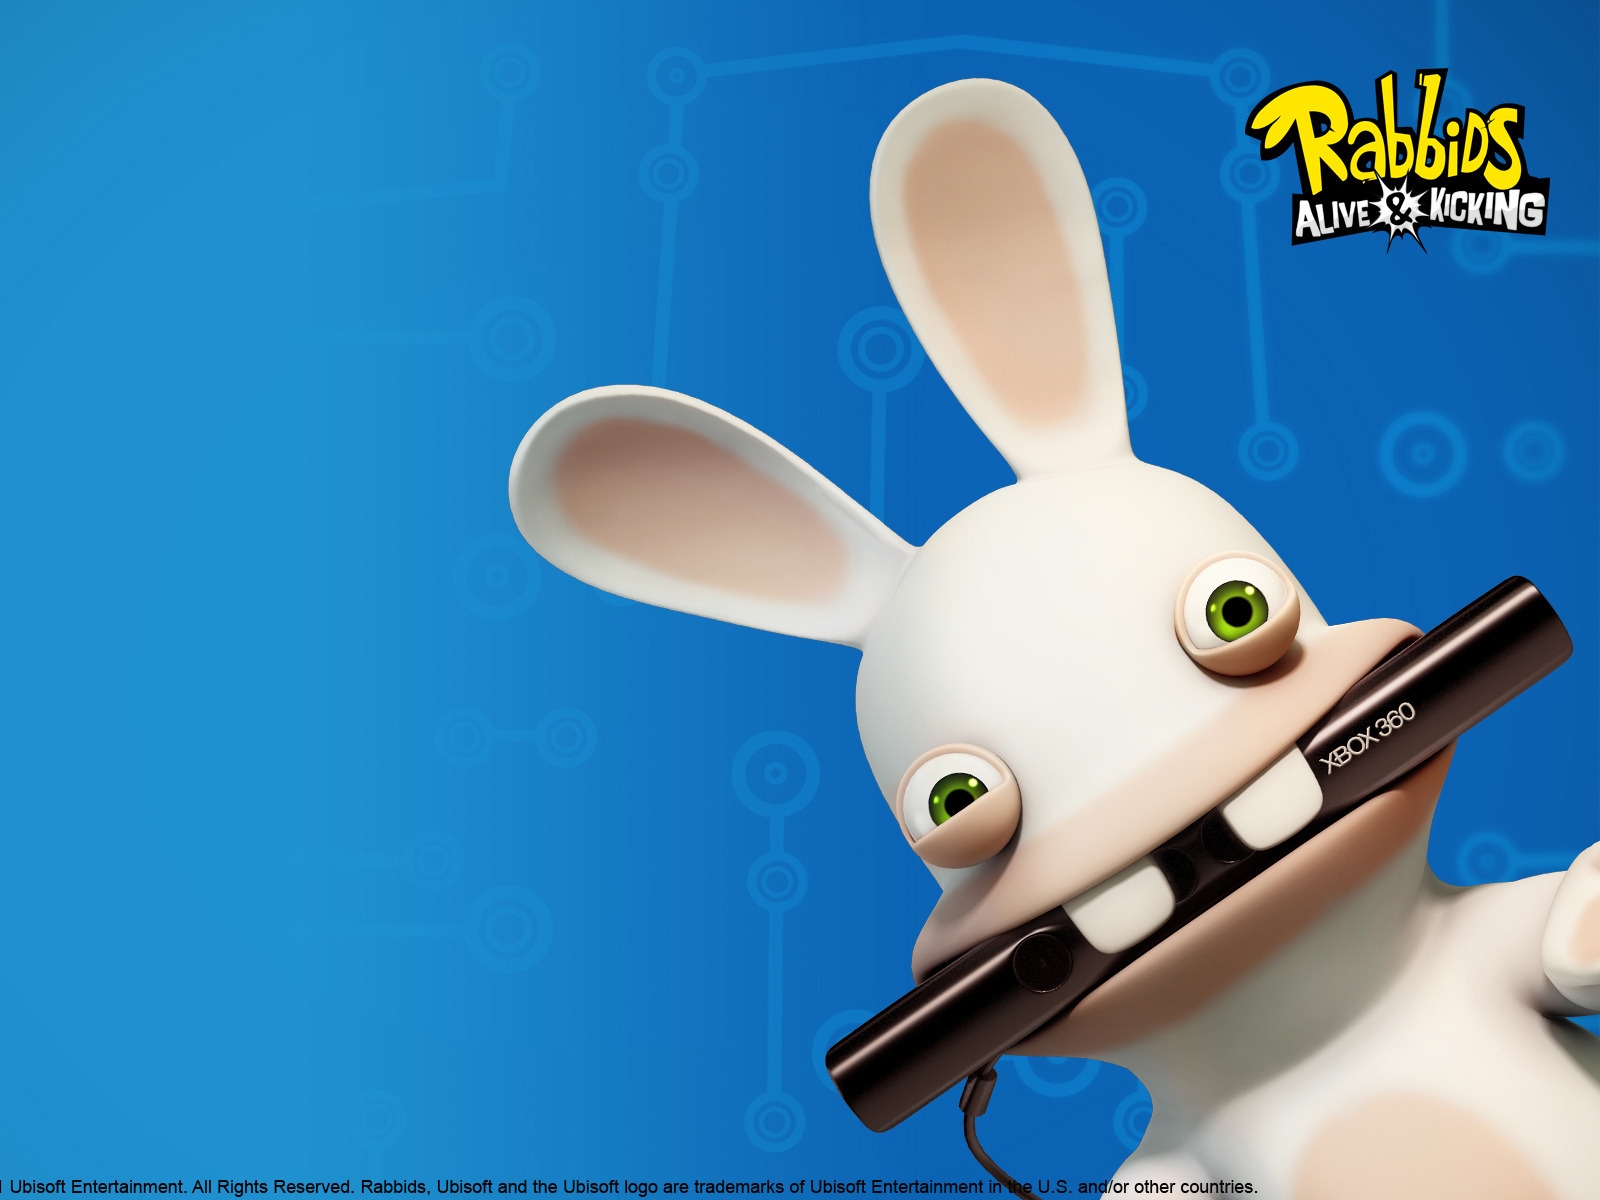 Rabbids Alive and Kicking for 1600 x 1200 resolution